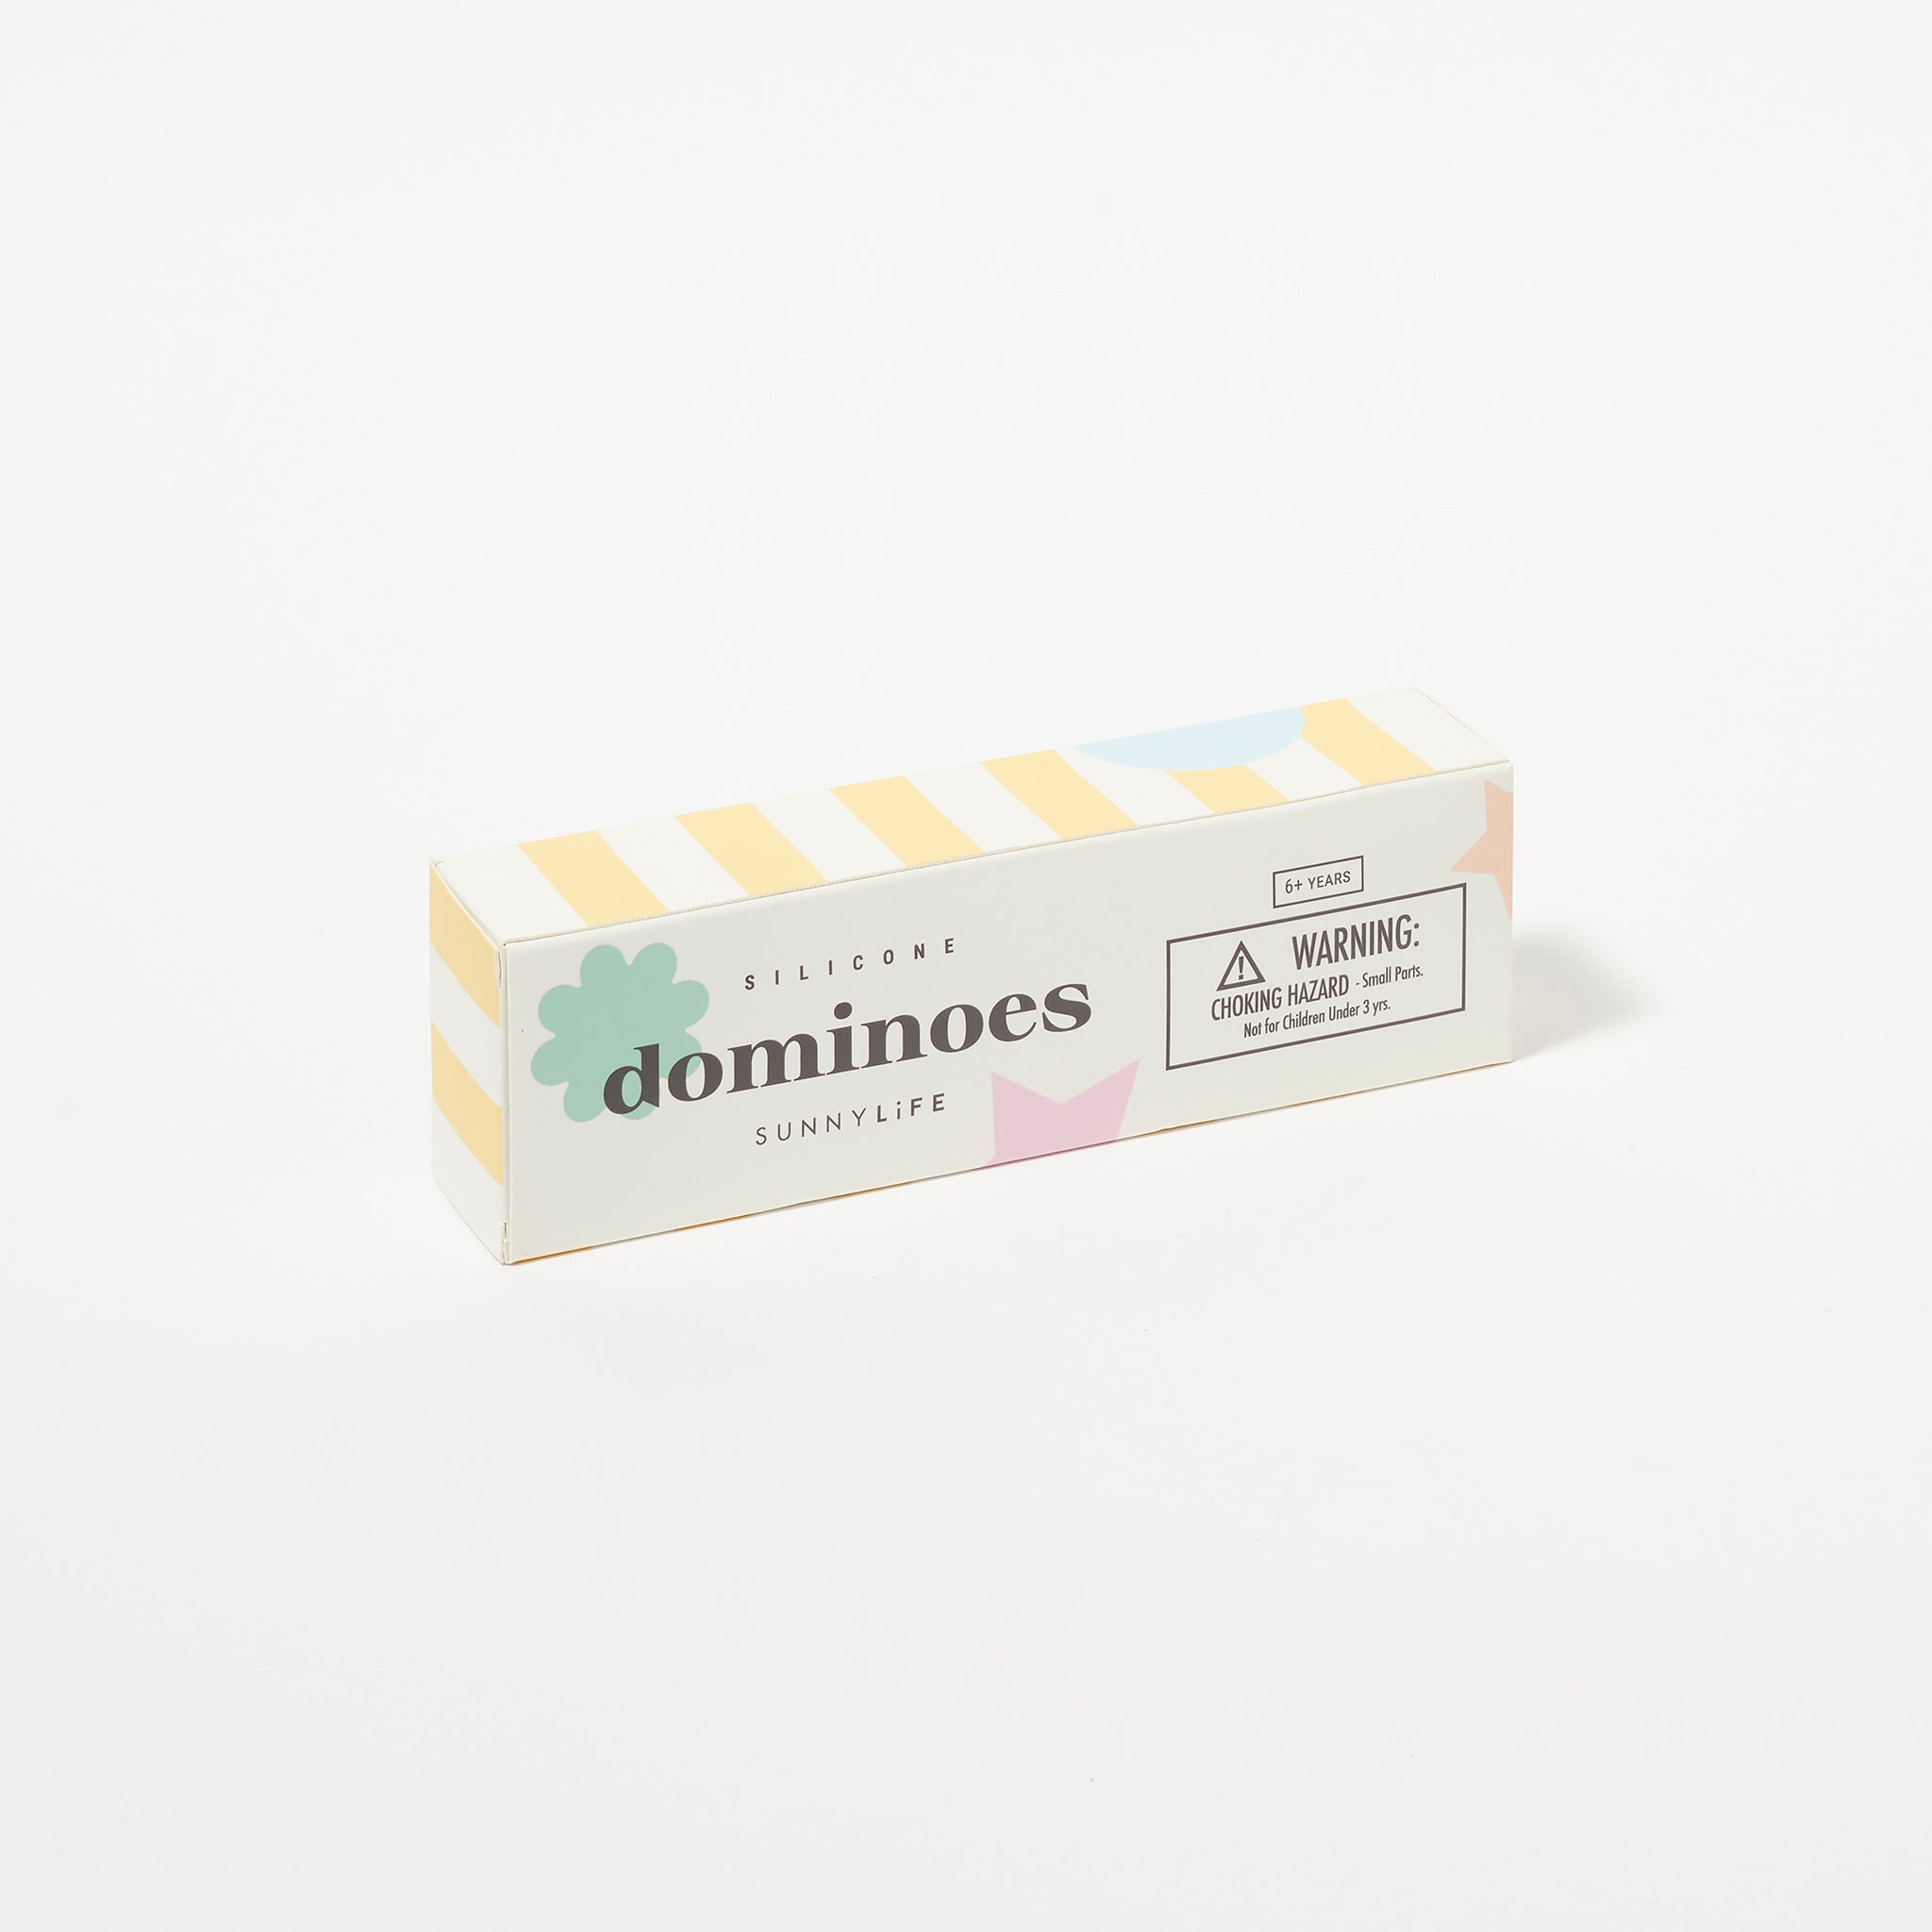 Silicone Dominoes | Circus